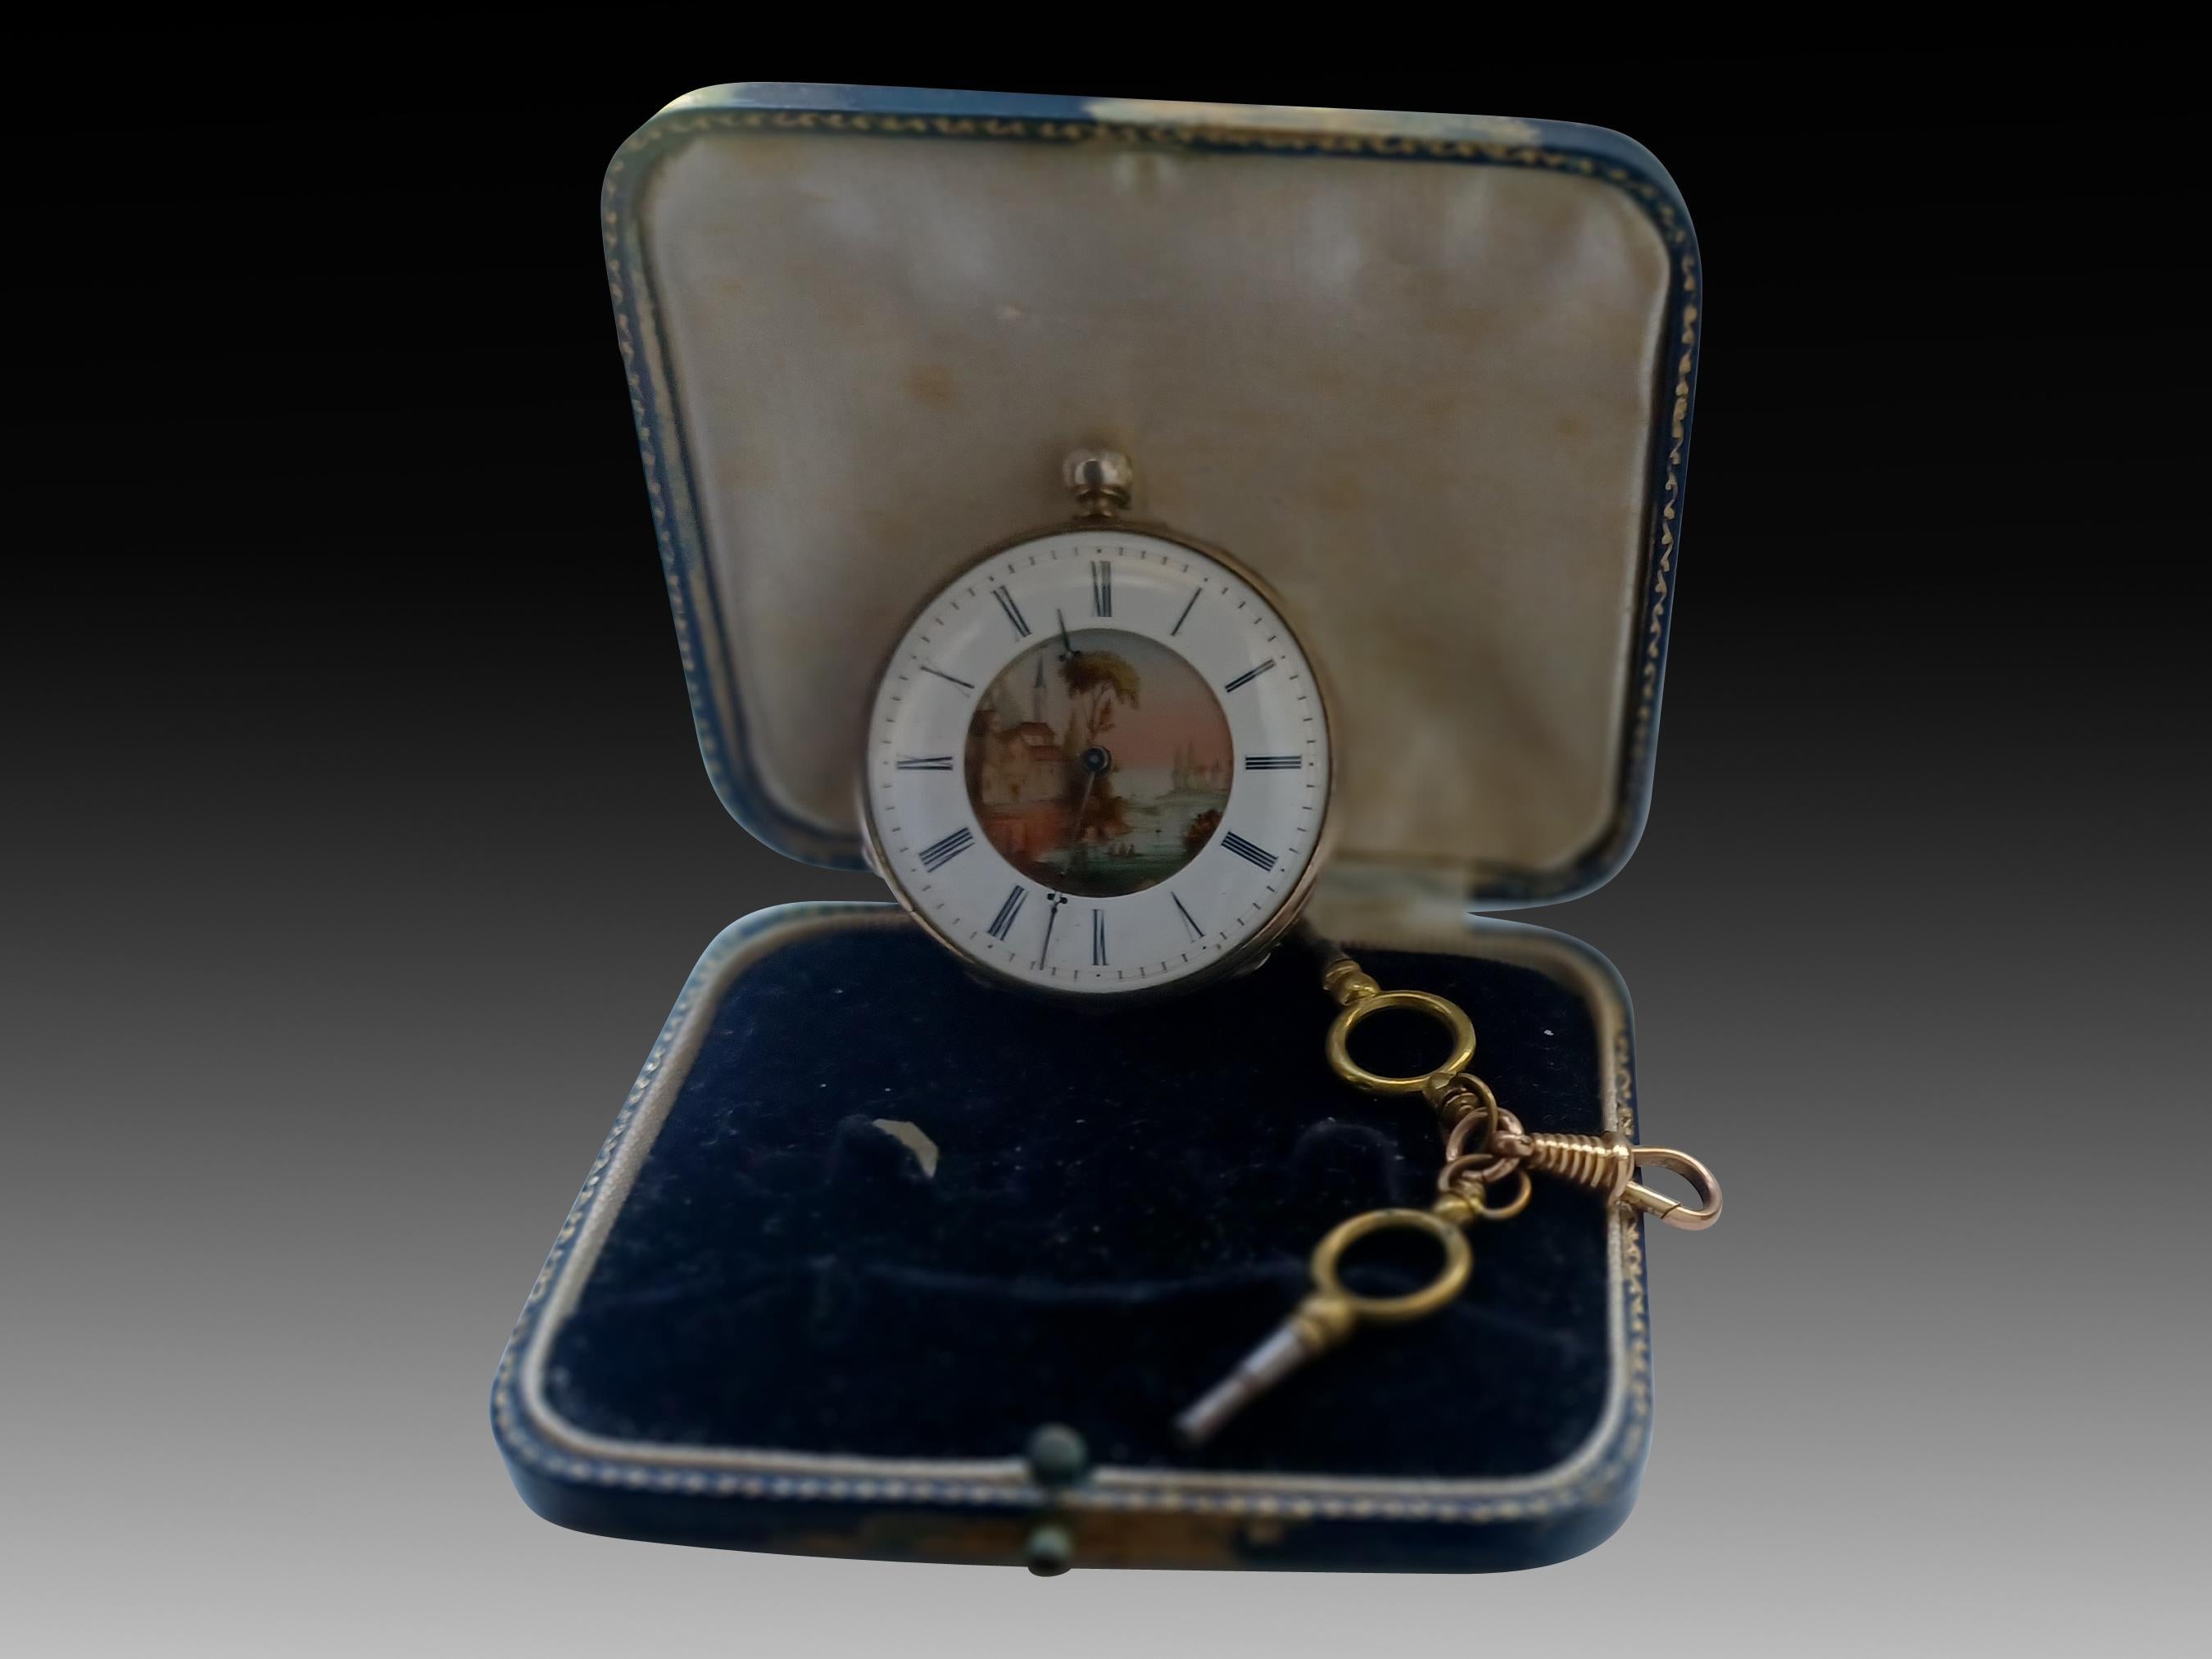 Men's Rare Antique Pocket Key Watch French 1800s with Painted Enamel Dial For Sale